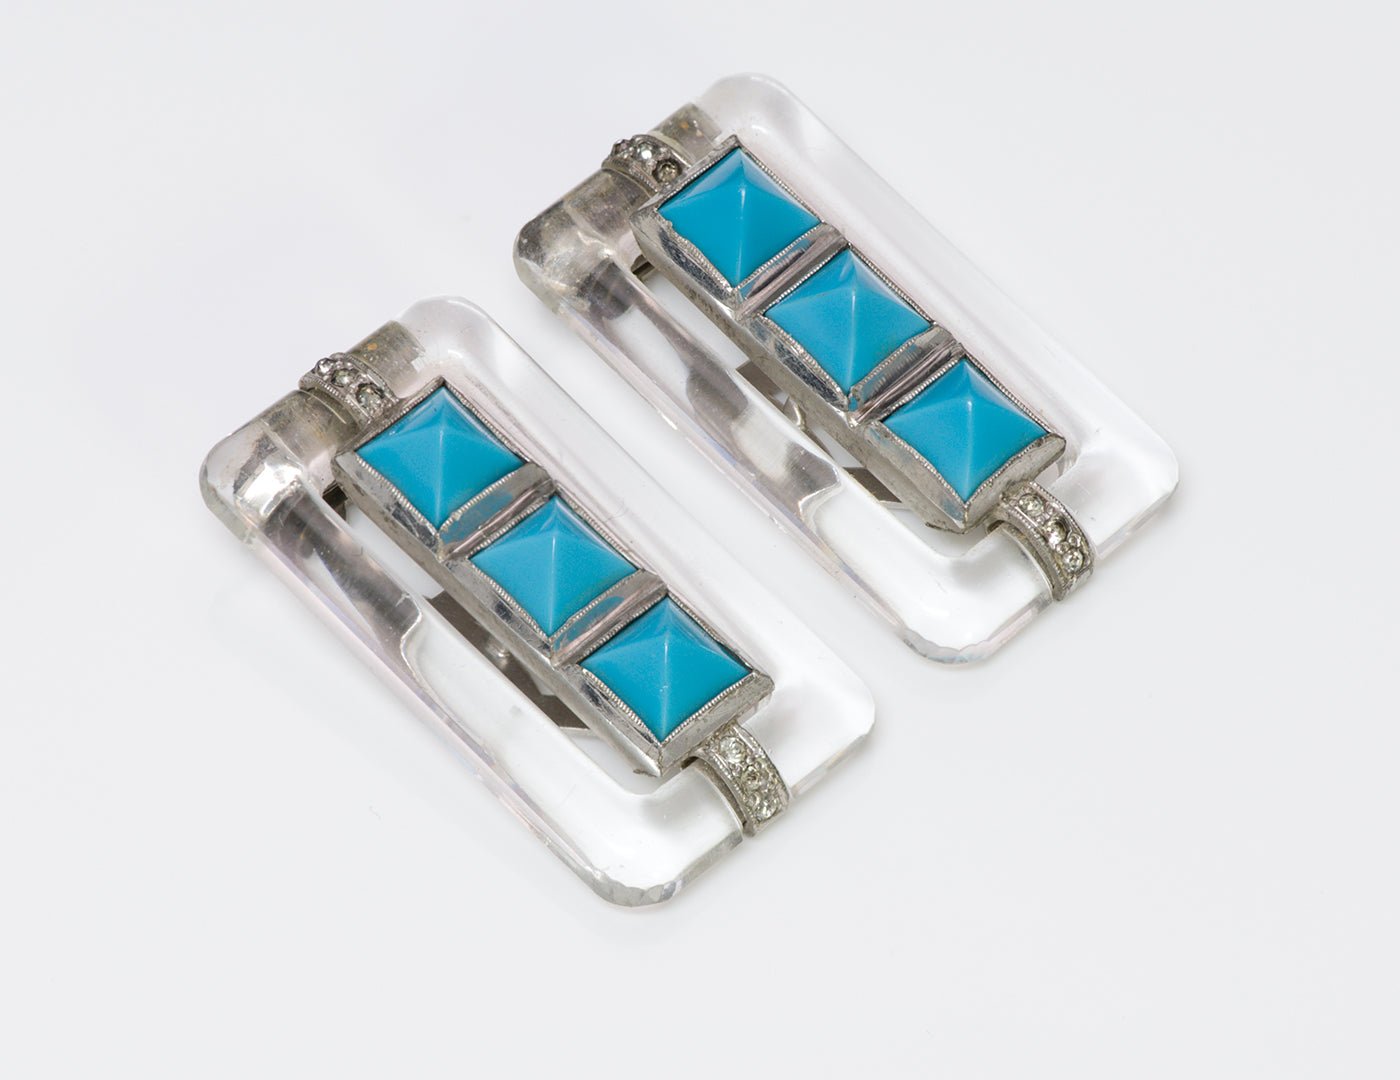 Trifari Alfred Philippe Art Deco Faux Turquoise Crystal Clips